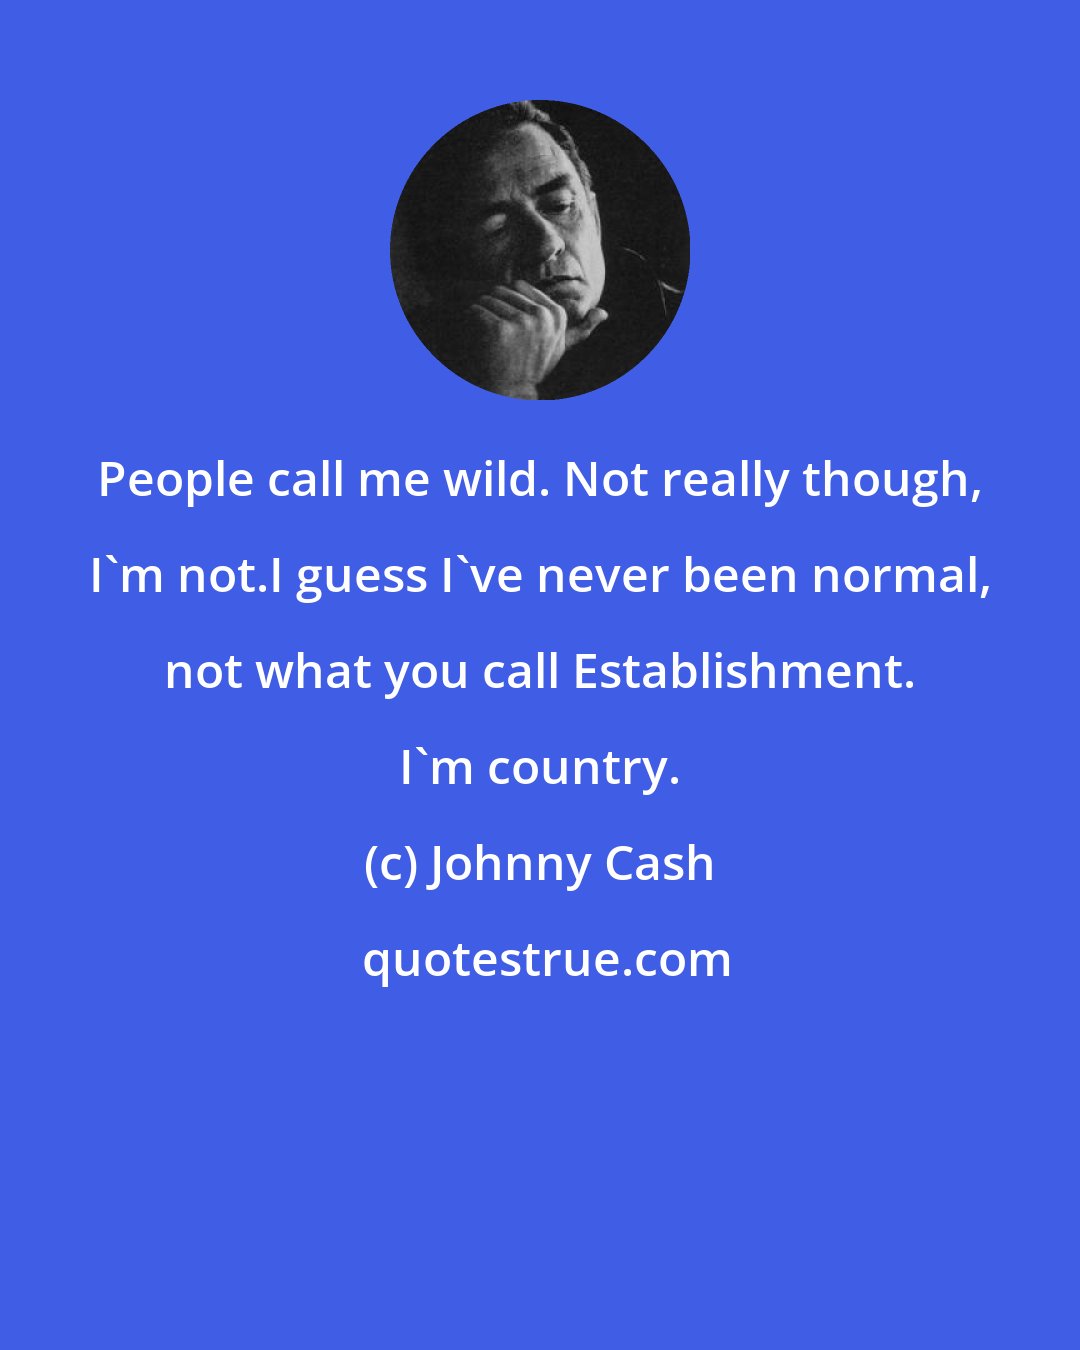 Johnny Cash: People call me wild. Not really though, I'm not.I guess I've never been normal, not what you call Establishment. I'm country.